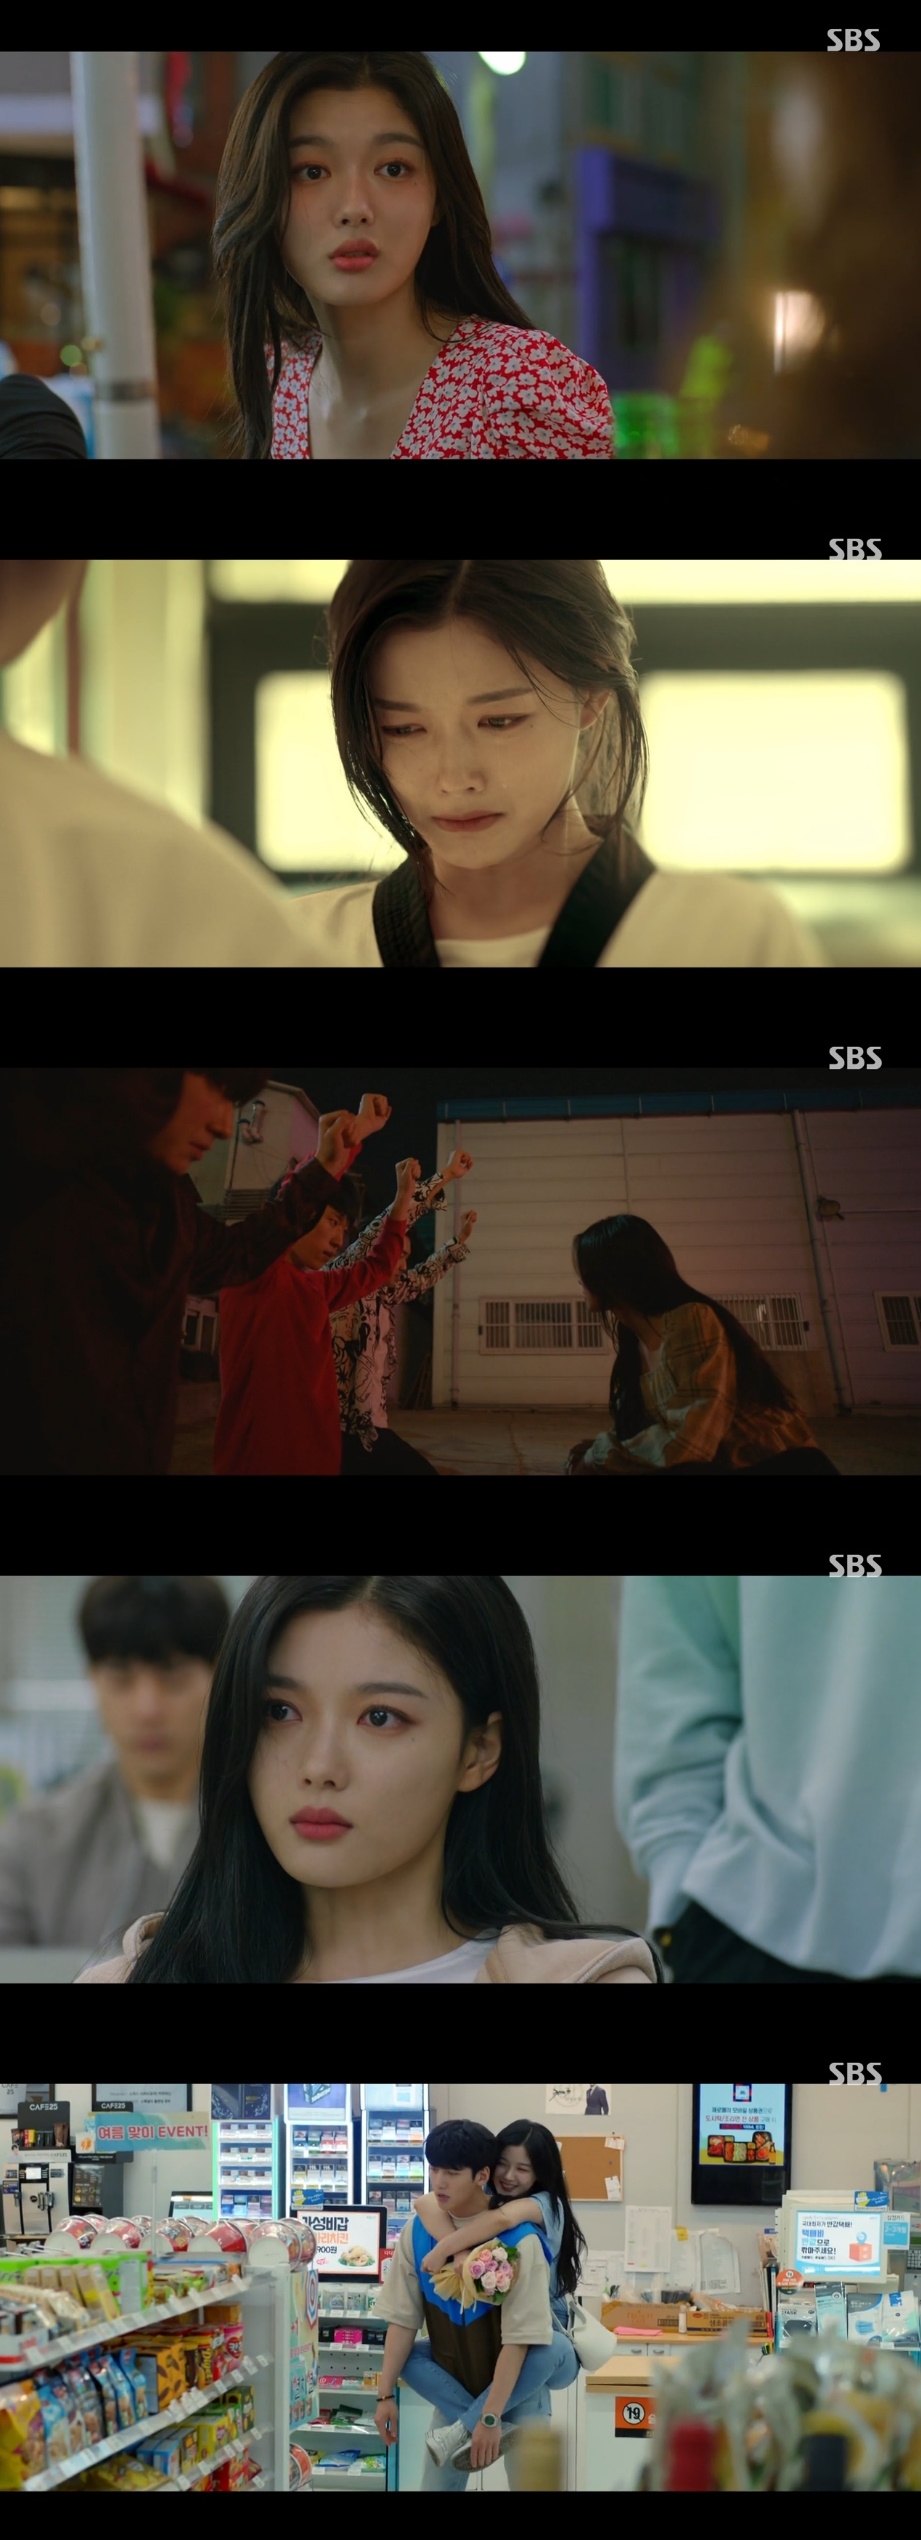 Comic is also a surprise: Kim Yoo-jung put down his calm and captivated viewers.The SBS gilt drama Convenience store morning star (playplayplay by Son Geun-joo/director Lee Myung-woo) was first broadcast on June 19, and it is a 24-hour unpredictable comic romance in which four-dimensional part-time students and a full-time manager, Hunan, unfold the Convenience store.Kim Yoo-jung played the role of a Convenience store part-time job.Kim Yoo-jung made his debut as a child actor and showed a calm and mature acting with numerous works.Kim Yoo-jung, who led the drama with a more mature appearance and proved the possibility of becoming an adult actor, challenged comic romance through Convenience store morning star.Kim Yoo-jung did not spare his passion to digest the star.Kim Yoo-jung said at the production presentation of Convenience store morning star I registered the action school for the first time for the character.I was nervous for the first time to kick and kick, but I was happy to shoot. Kim Yoo-jung was also playing tough Acting without a band and filmed without a wire trick, so he showed 100% ice in the wrong and full of stars from the first fire.It was not only a colorful action, but also a sadness of the past, Ji Chang-wook, and a realistic expression of the audience.In the fourth episode broadcast on June 27, Kim Yoo-jung recalled his father who died when he saw Choi Dae-heon (Ji Chang-wook), who claimed to be his guardian.After misunderstanding Choi Dae-heon, Jung-Sun-Sun became a part-time student and became a part-time employee.Kim Yoo-jungs affectionate eyes and emotional acting made viewers clutter and the savage ambassador laughed.There are many reactions that Kim Yoo-jung, who naturally melted into the star, comes up with the movie Bizarre Girl Jeon Ji-hyun.It is said that he has made good use of his charming charm in his beautiful appearance with his accumulated acting ability.